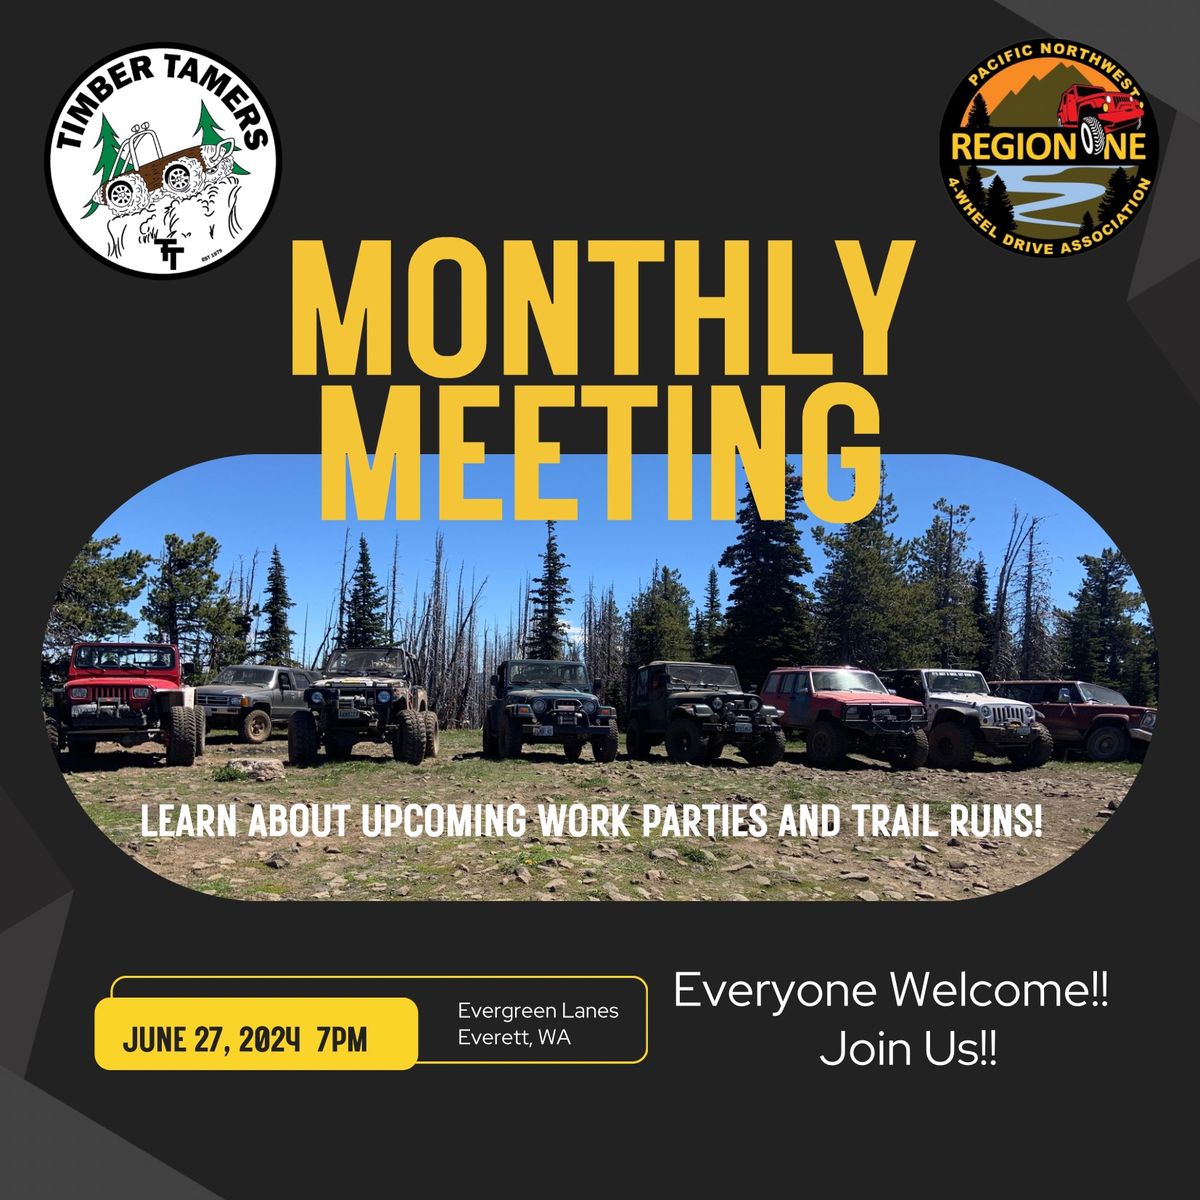 Timber Tamers Monthly Meeting